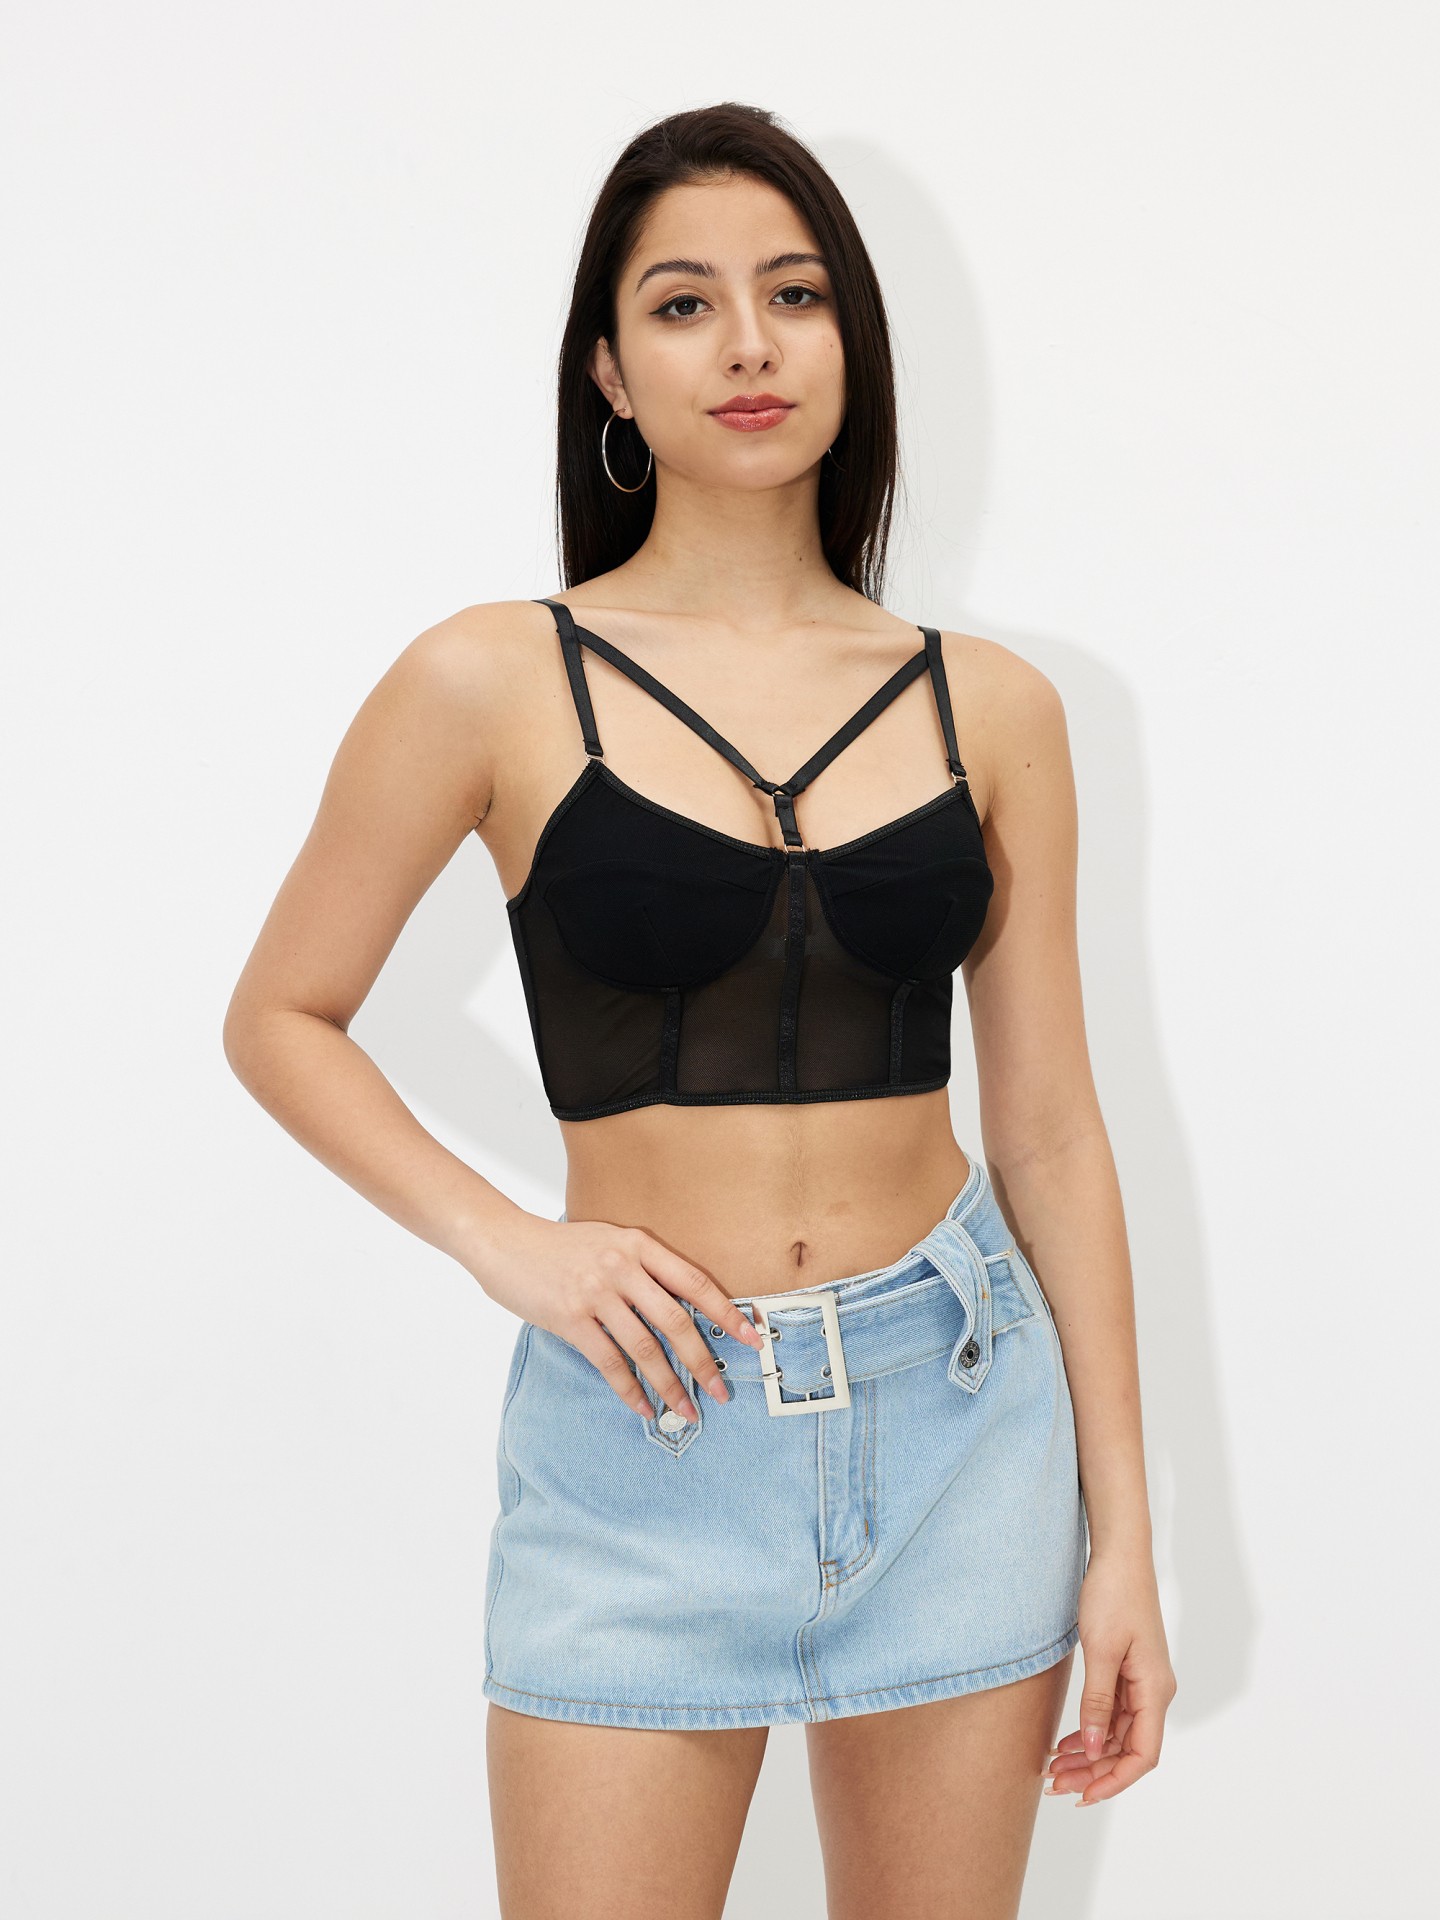 Sexy black lace bralette crop top with a sheer design instagram